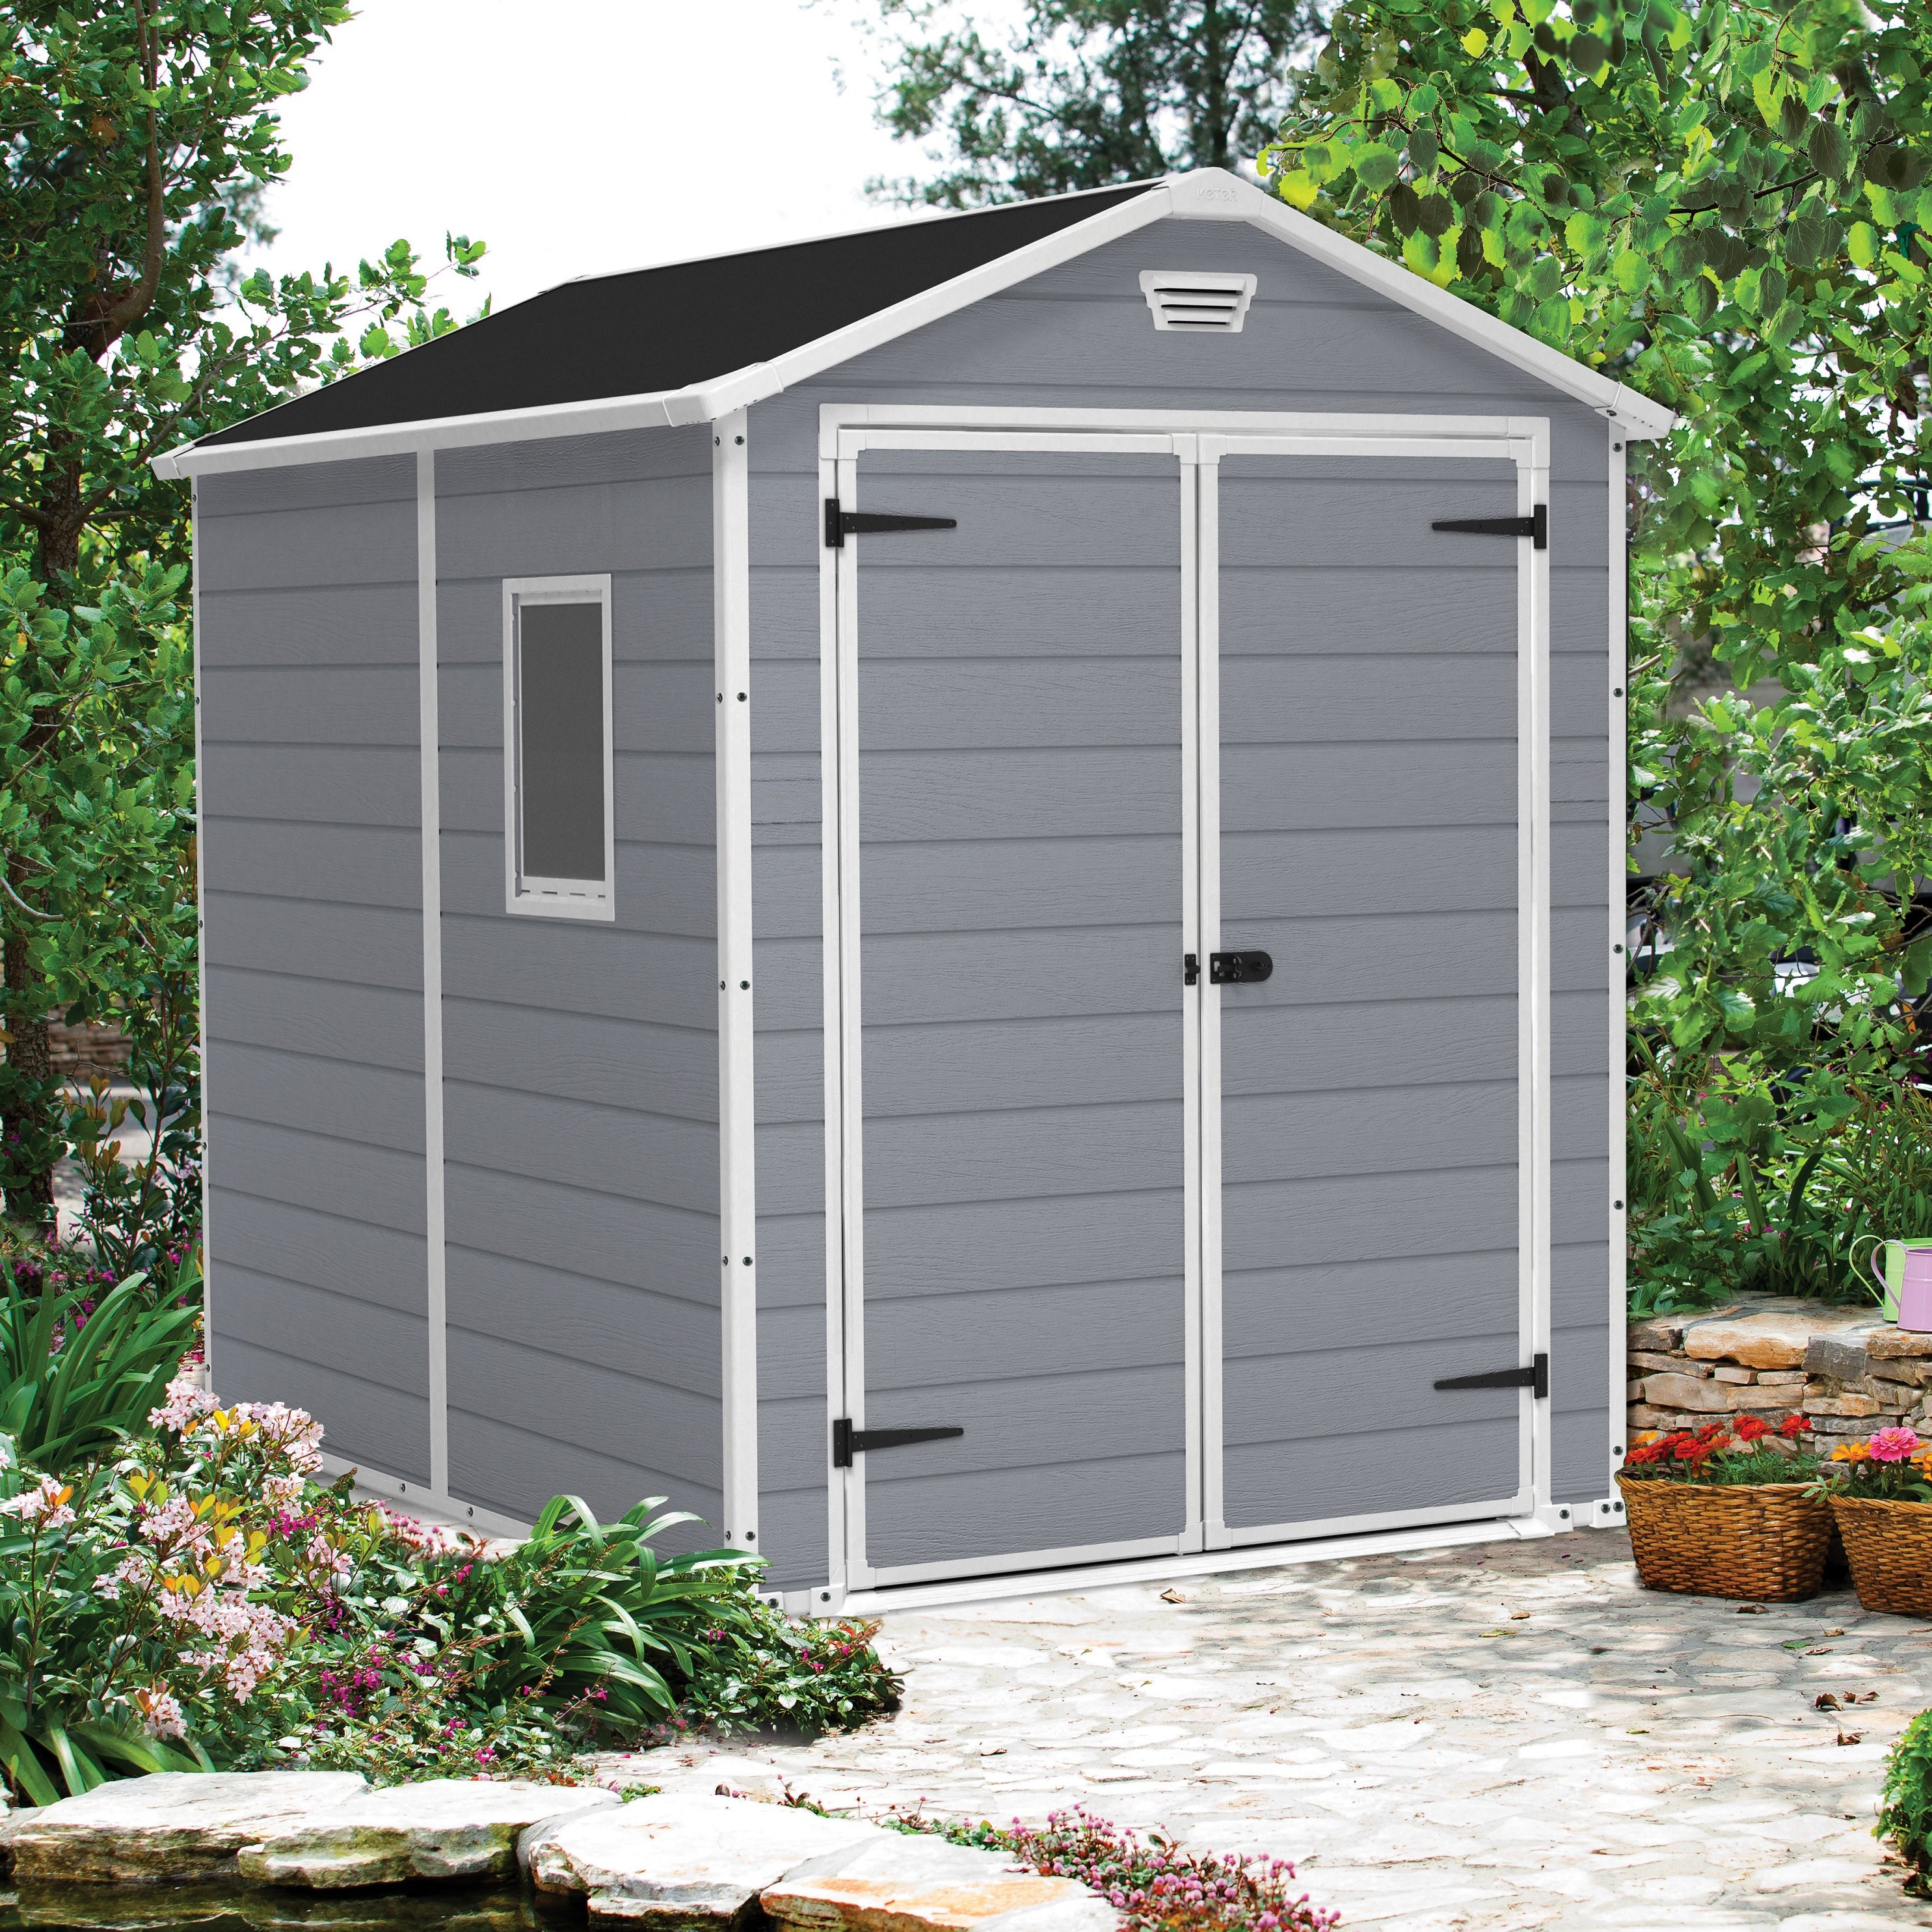 Keter Manor 6 Ft W X 74 Ft Plastic Storage Shed Reviews Wayfair intended for dimensions 2970 X 2970